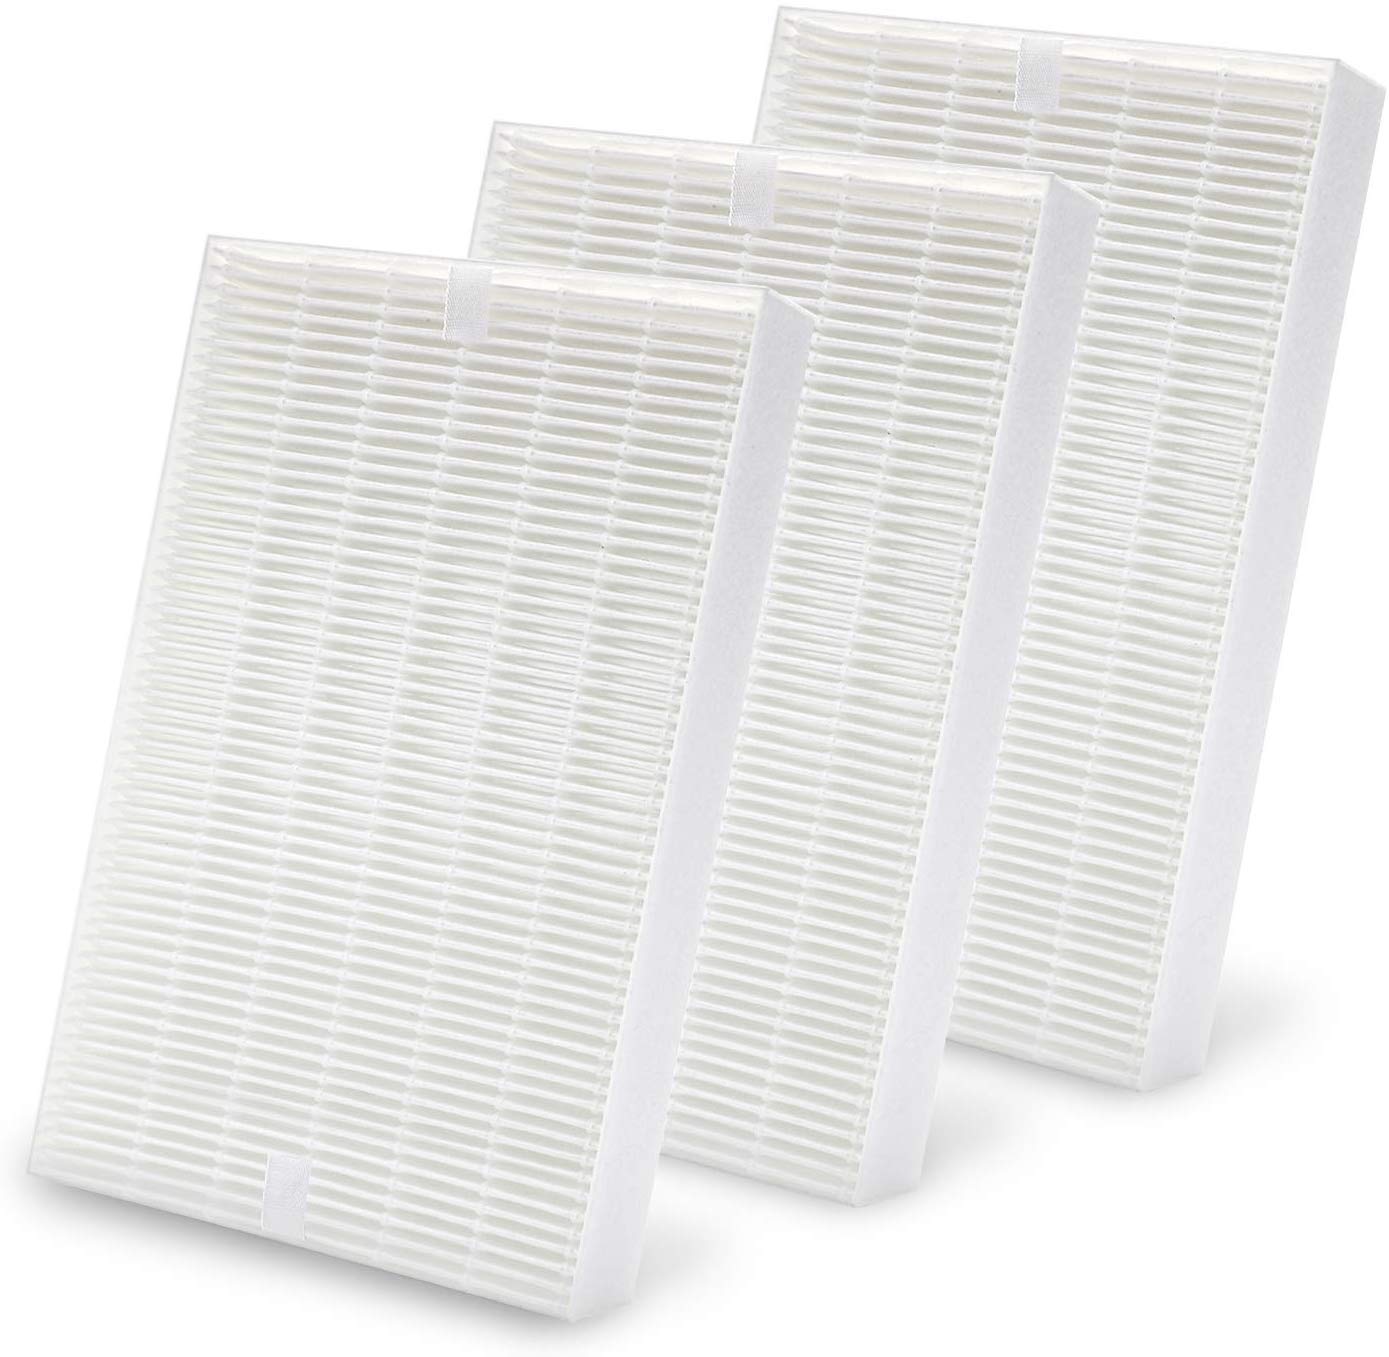 K-Musculo hpa300 Hepa Replacement Filter Compatible with Honeywell HRF-R3 for HPA090, HPA100, HPA200, HPA250 and HPA300 Series Air Purifiers, 3 Pack